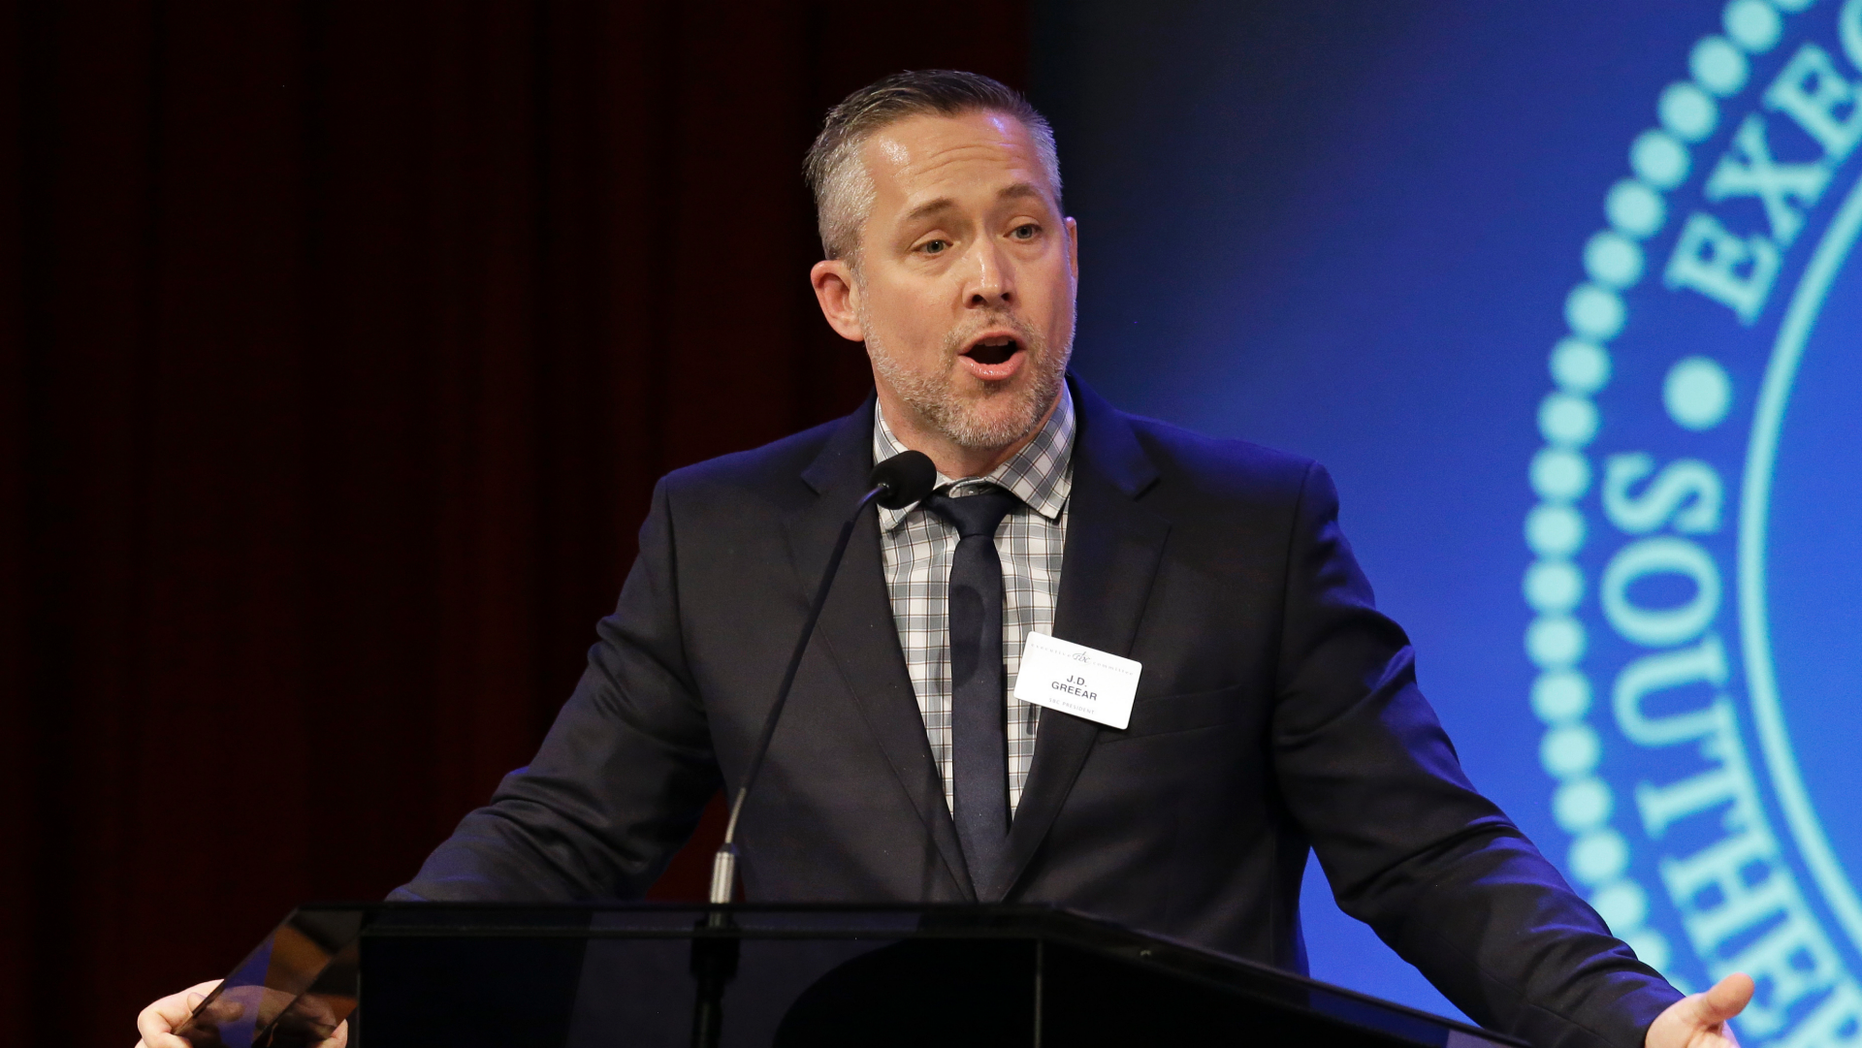 Southern Baptist Convention President JD Greear addressed the confession executive committee on Monday, Feb. 18, 2019, in Nashville, Tenn., Talking about plans to solve the problem. (AP Photo / Mark Humphrey)